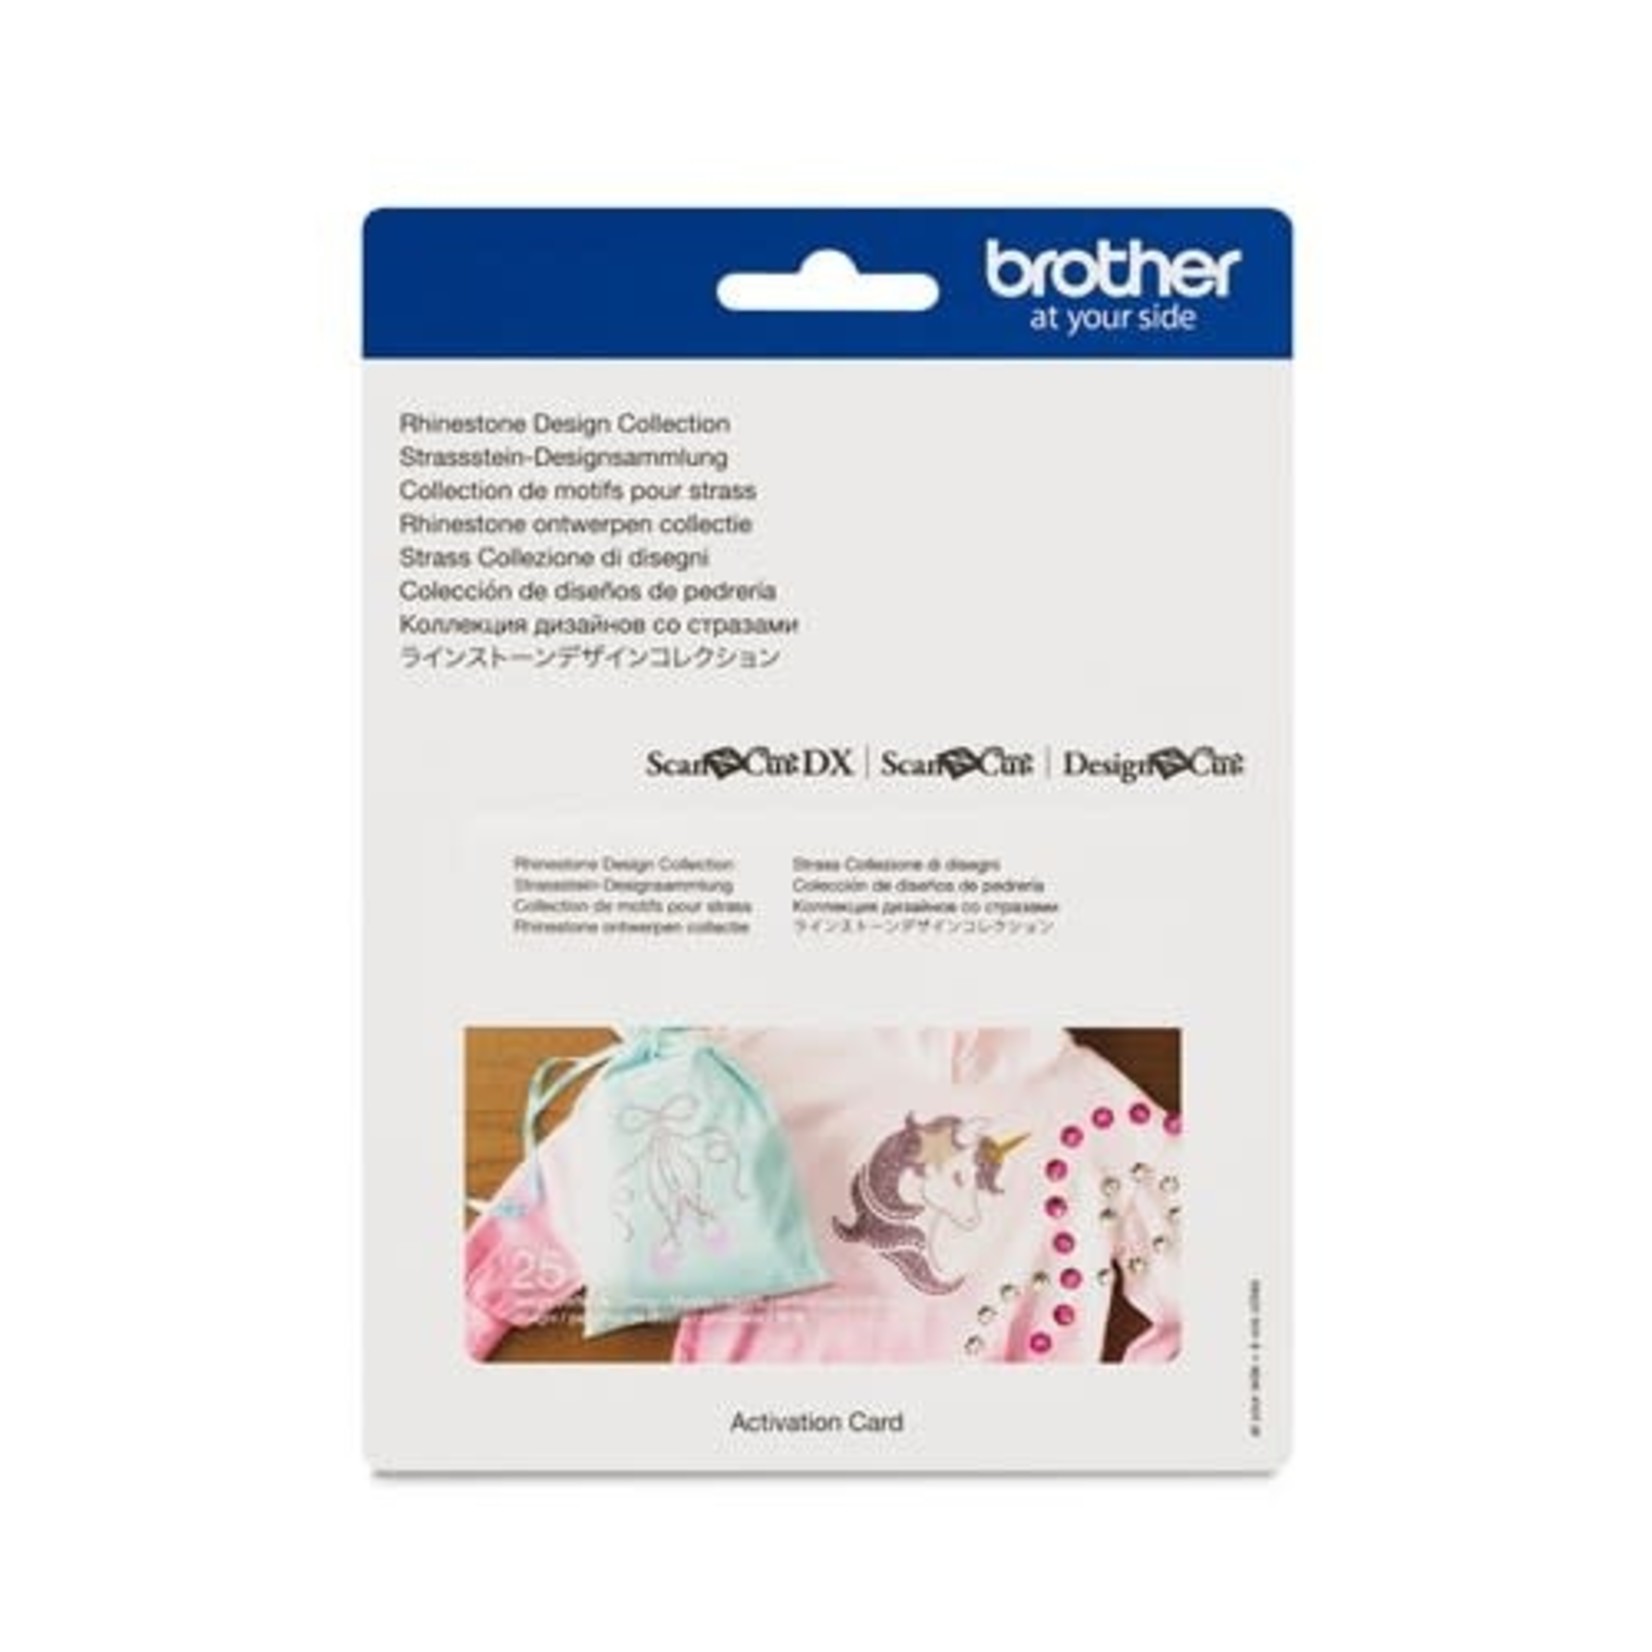 Brother BROTHER RHINESTONE DESIGN COLLECTION SCAN N CUT DX